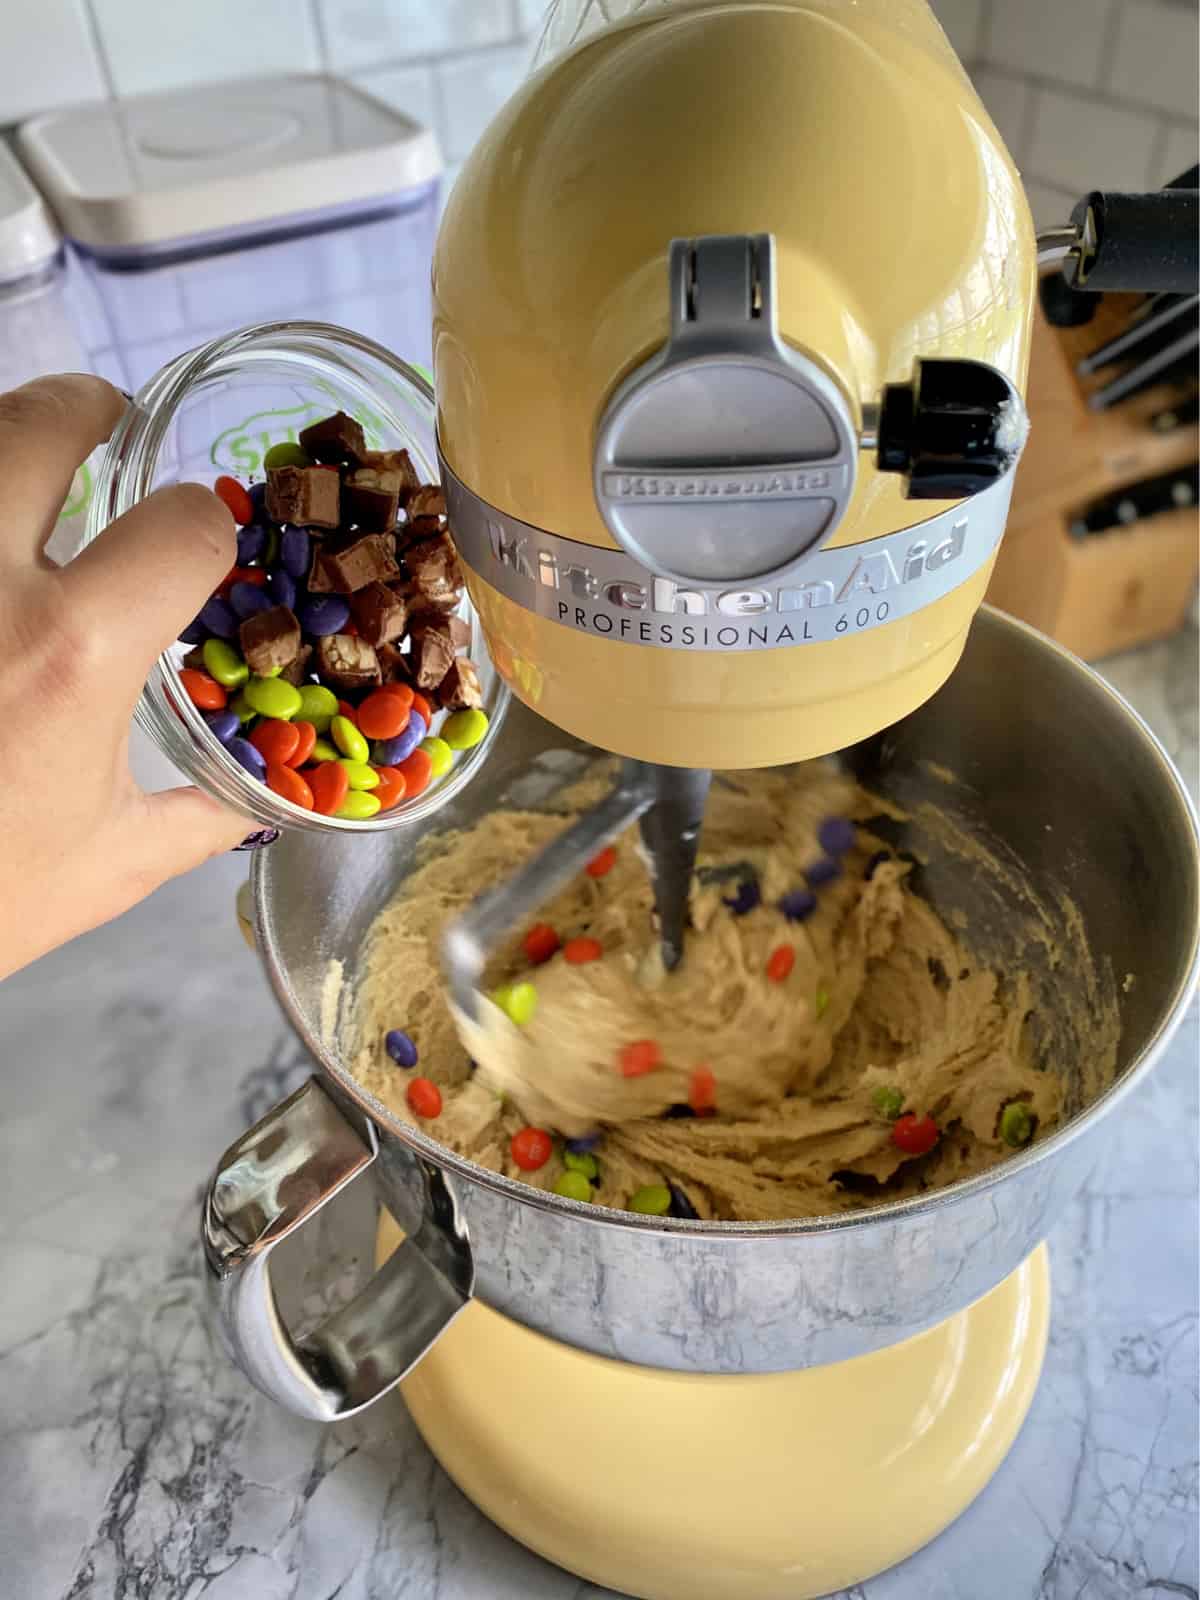 Candy being poured into a yellow KitchenAid Mixing bowl with cookie dough.